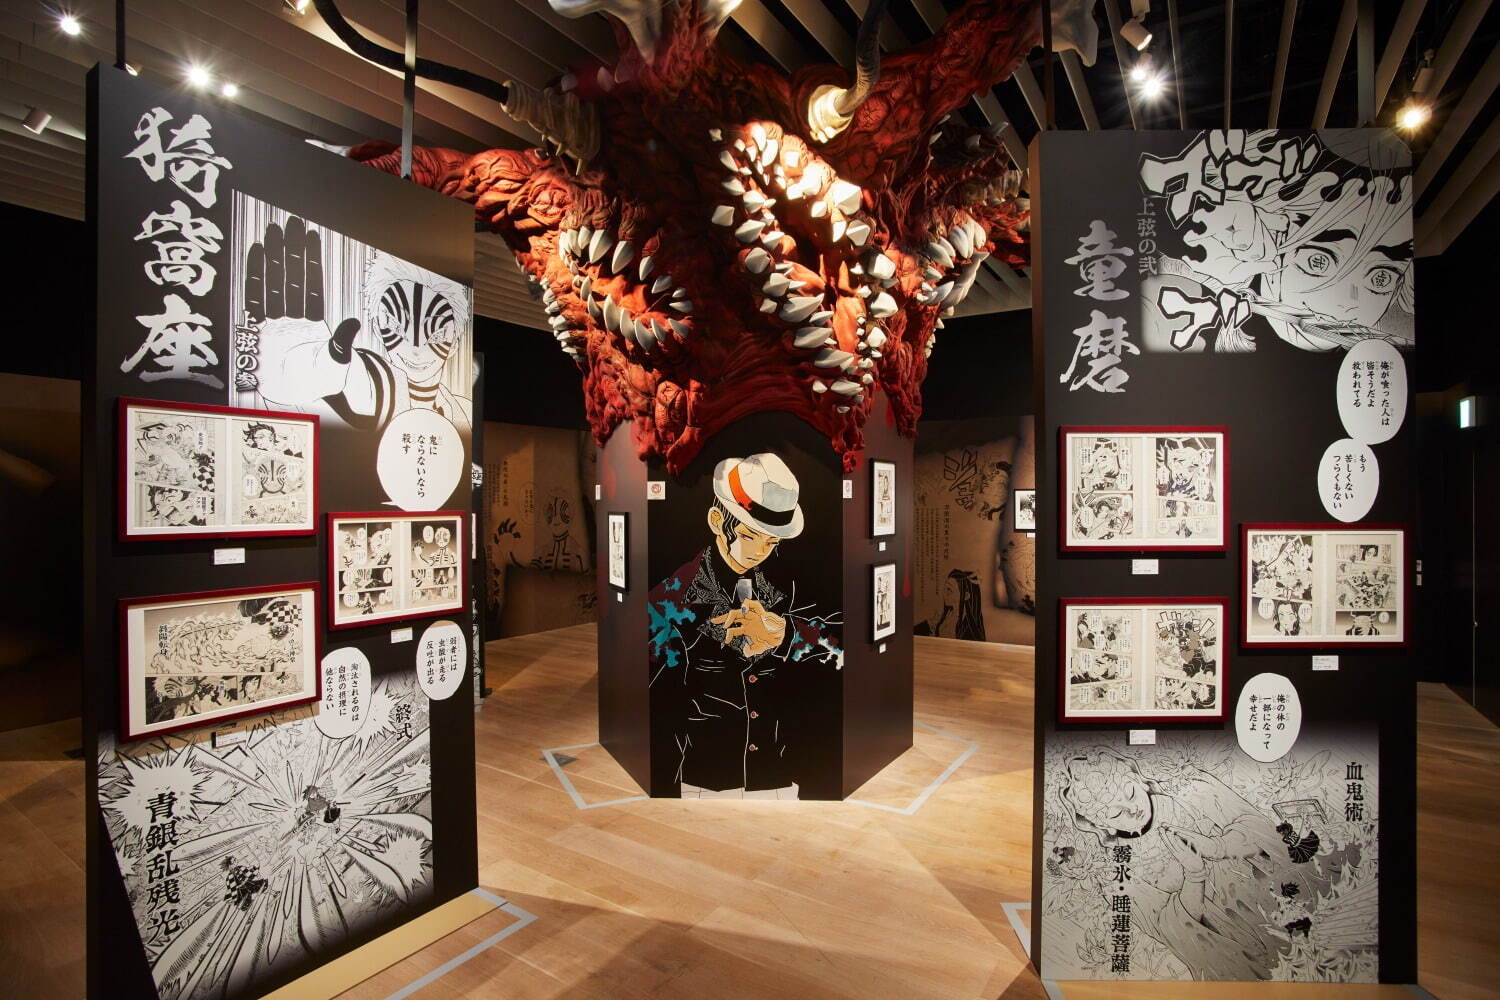 ANIME NEWS: First 'Demon Slayer' exhibition to open on March 20 in